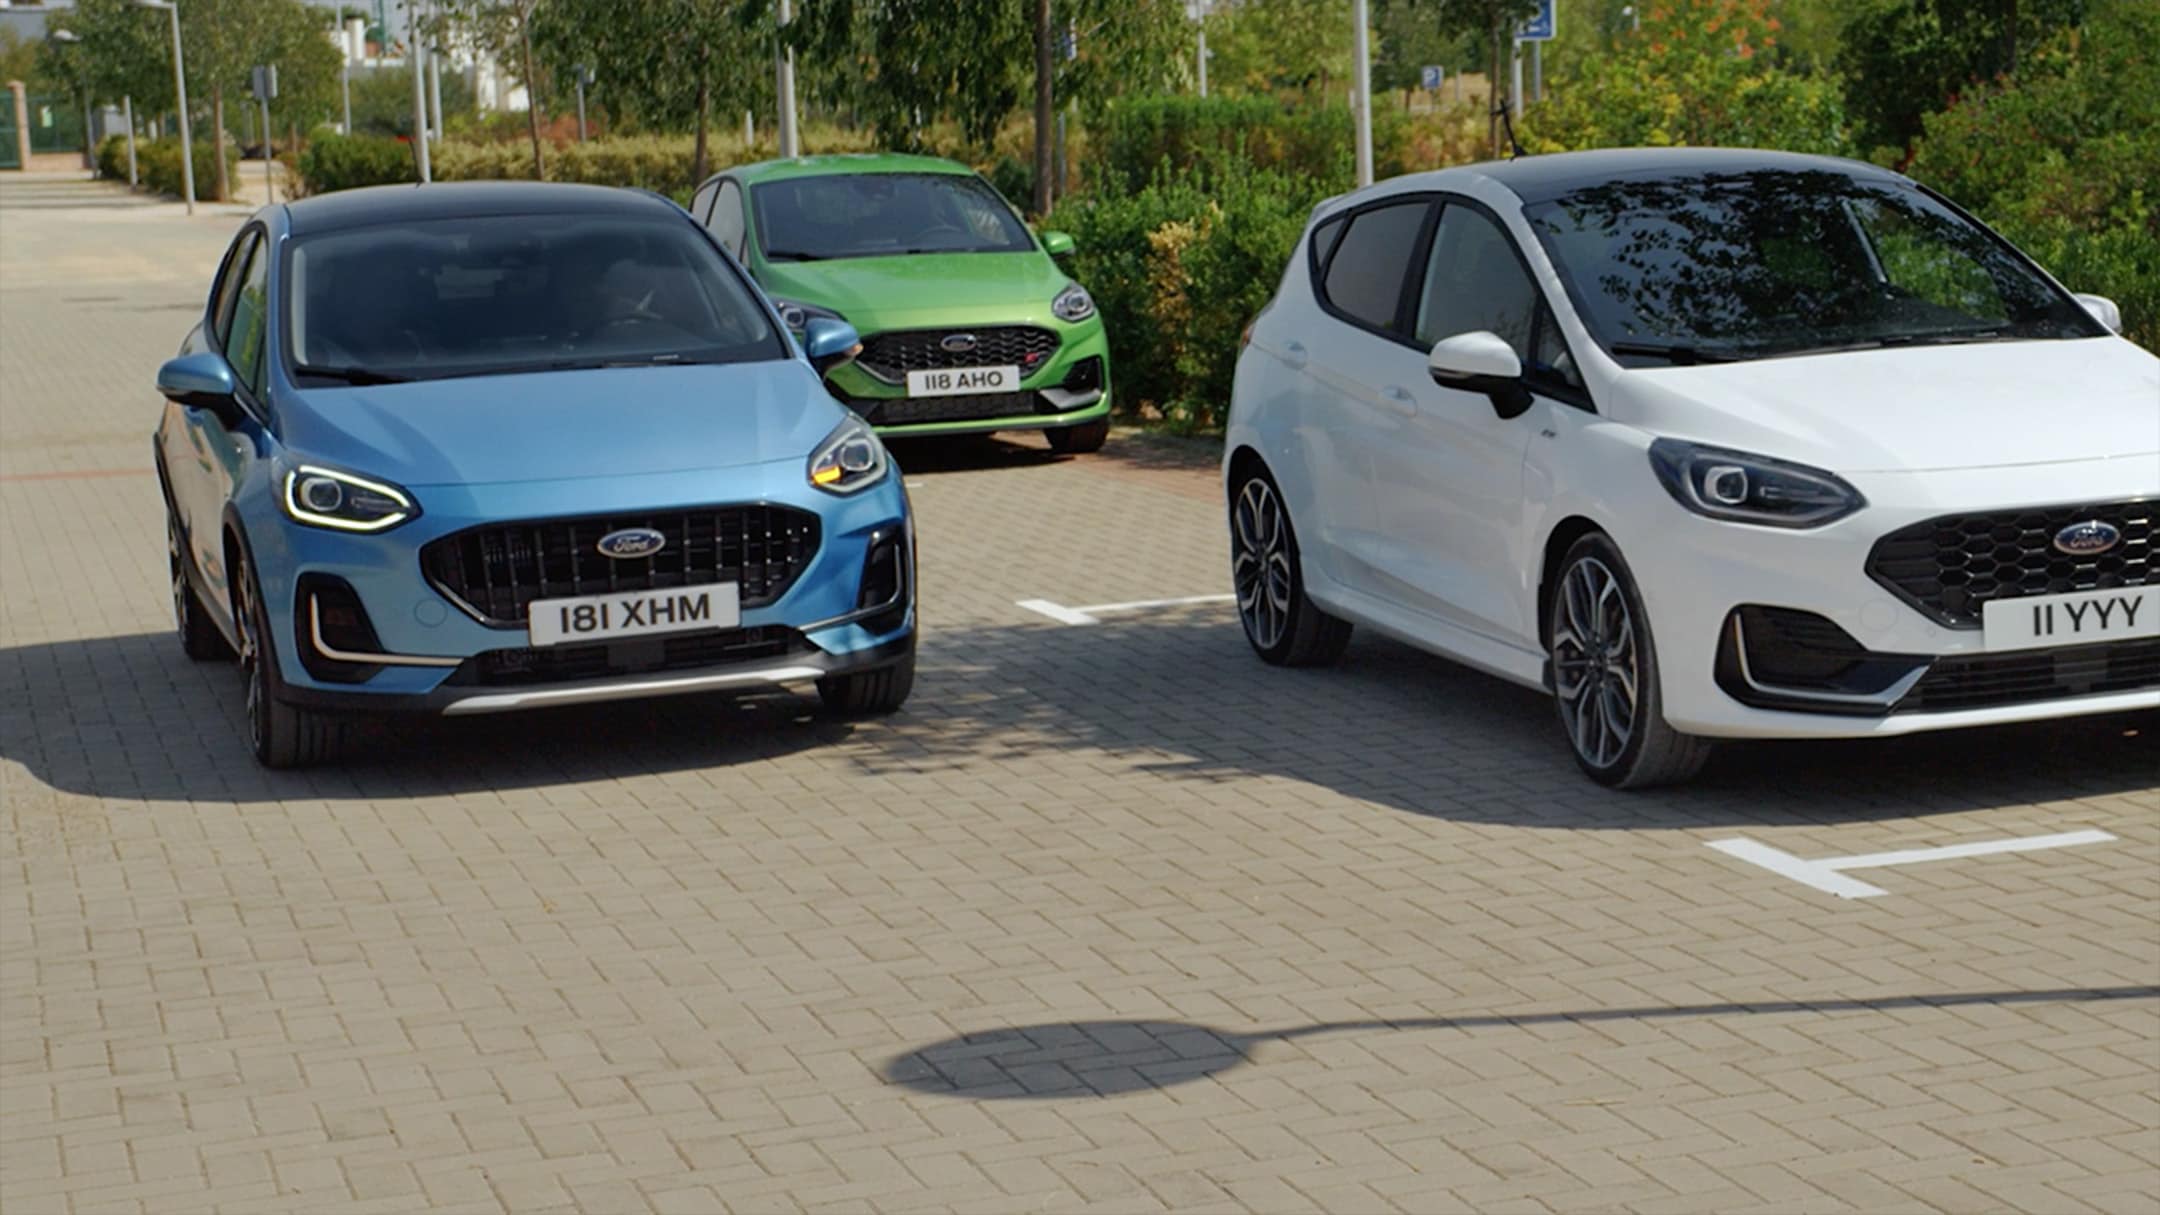 Three Ford Fiesta's in an outdoor location demonstrating the safety features